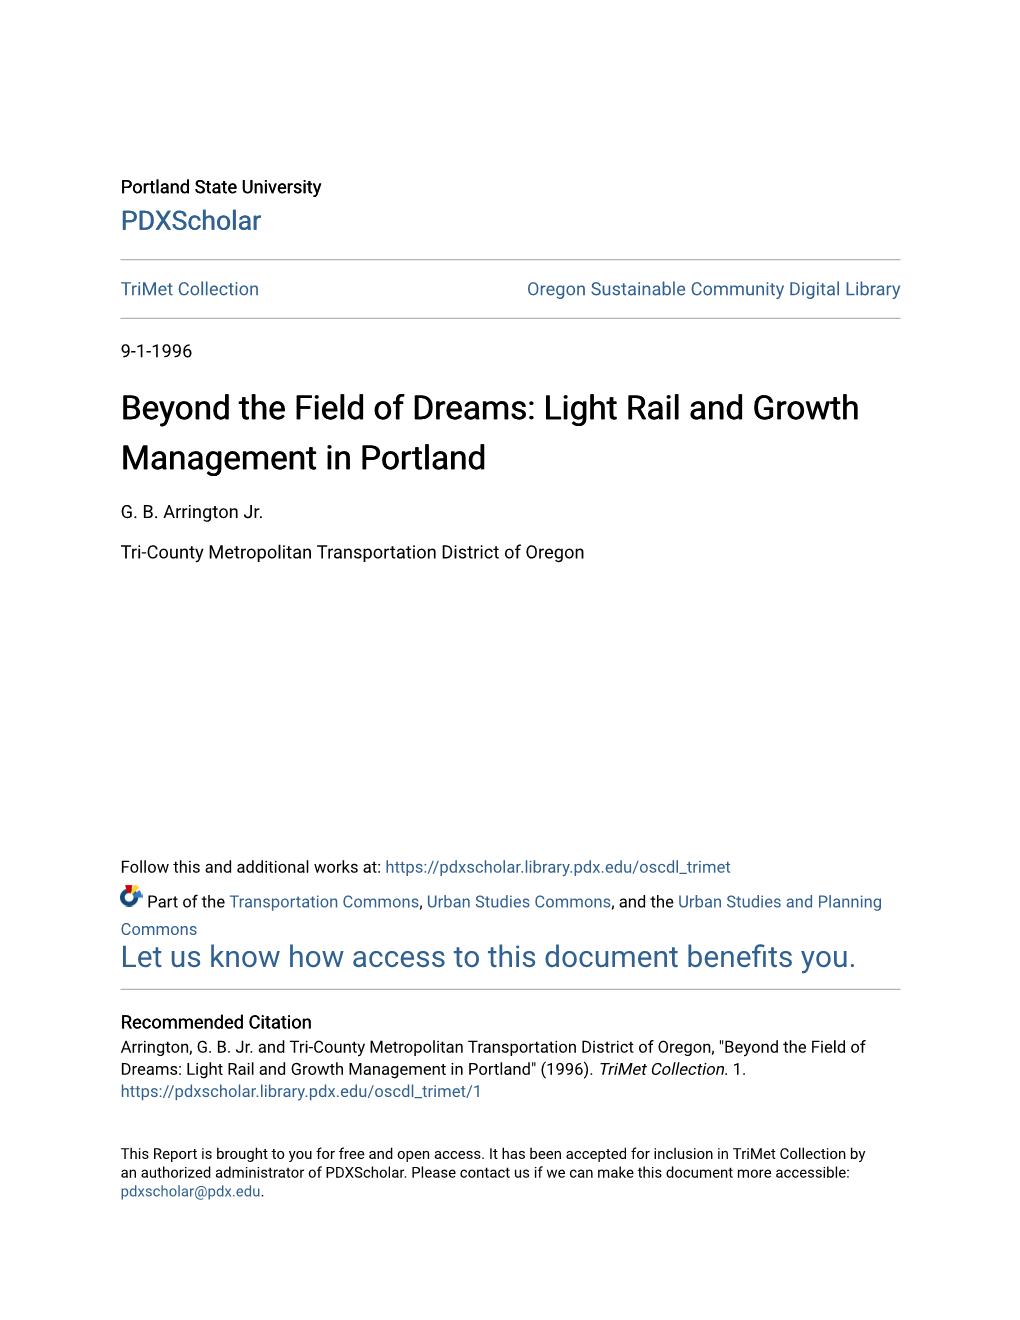 Beyond the Field of Dreams: Light Rail and Growth Management in Portland